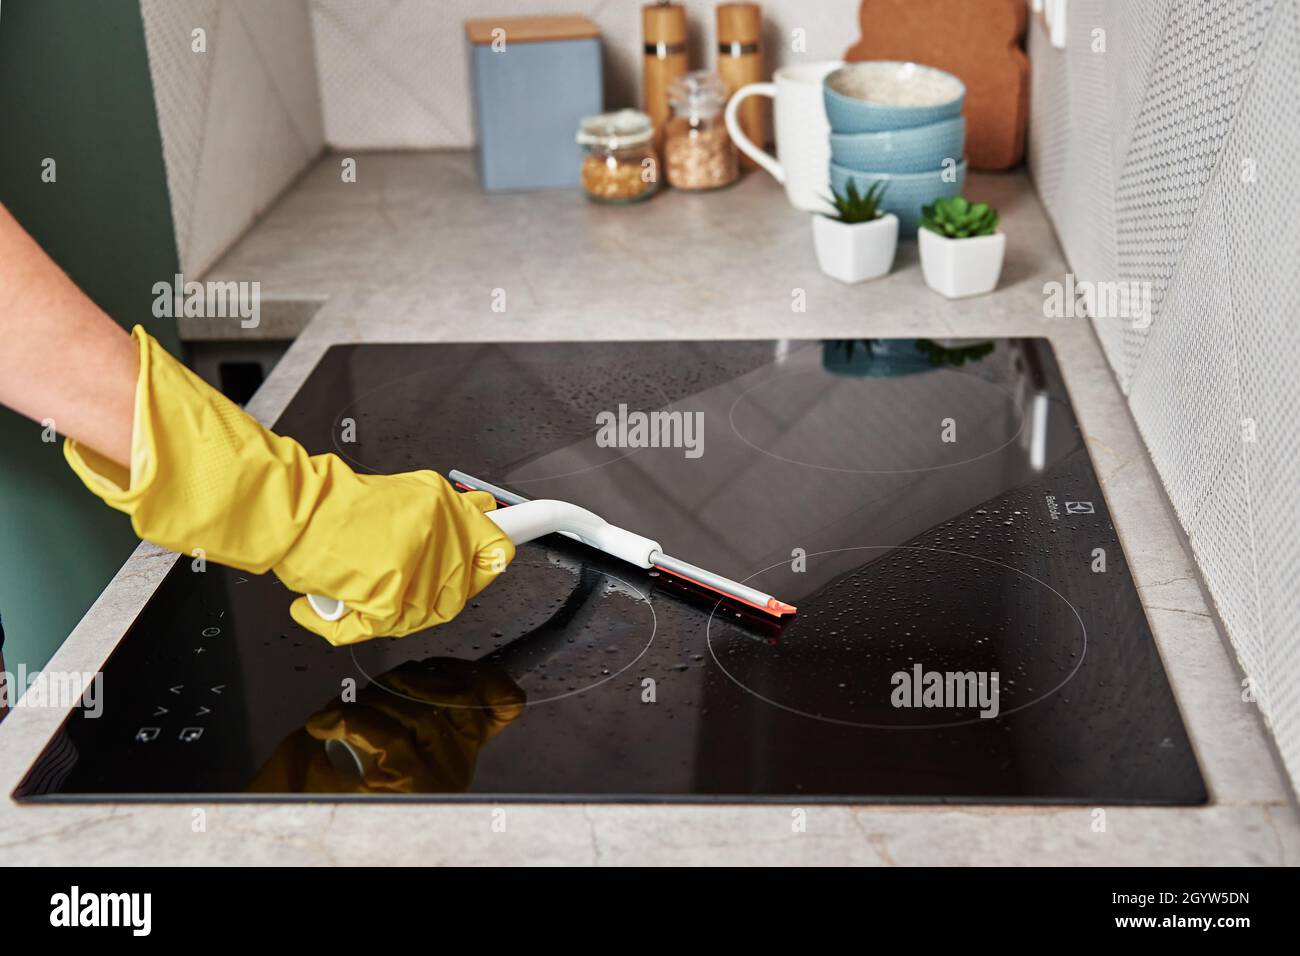 Dirtbusters stove polish on a white background Stock Photo - Alamy